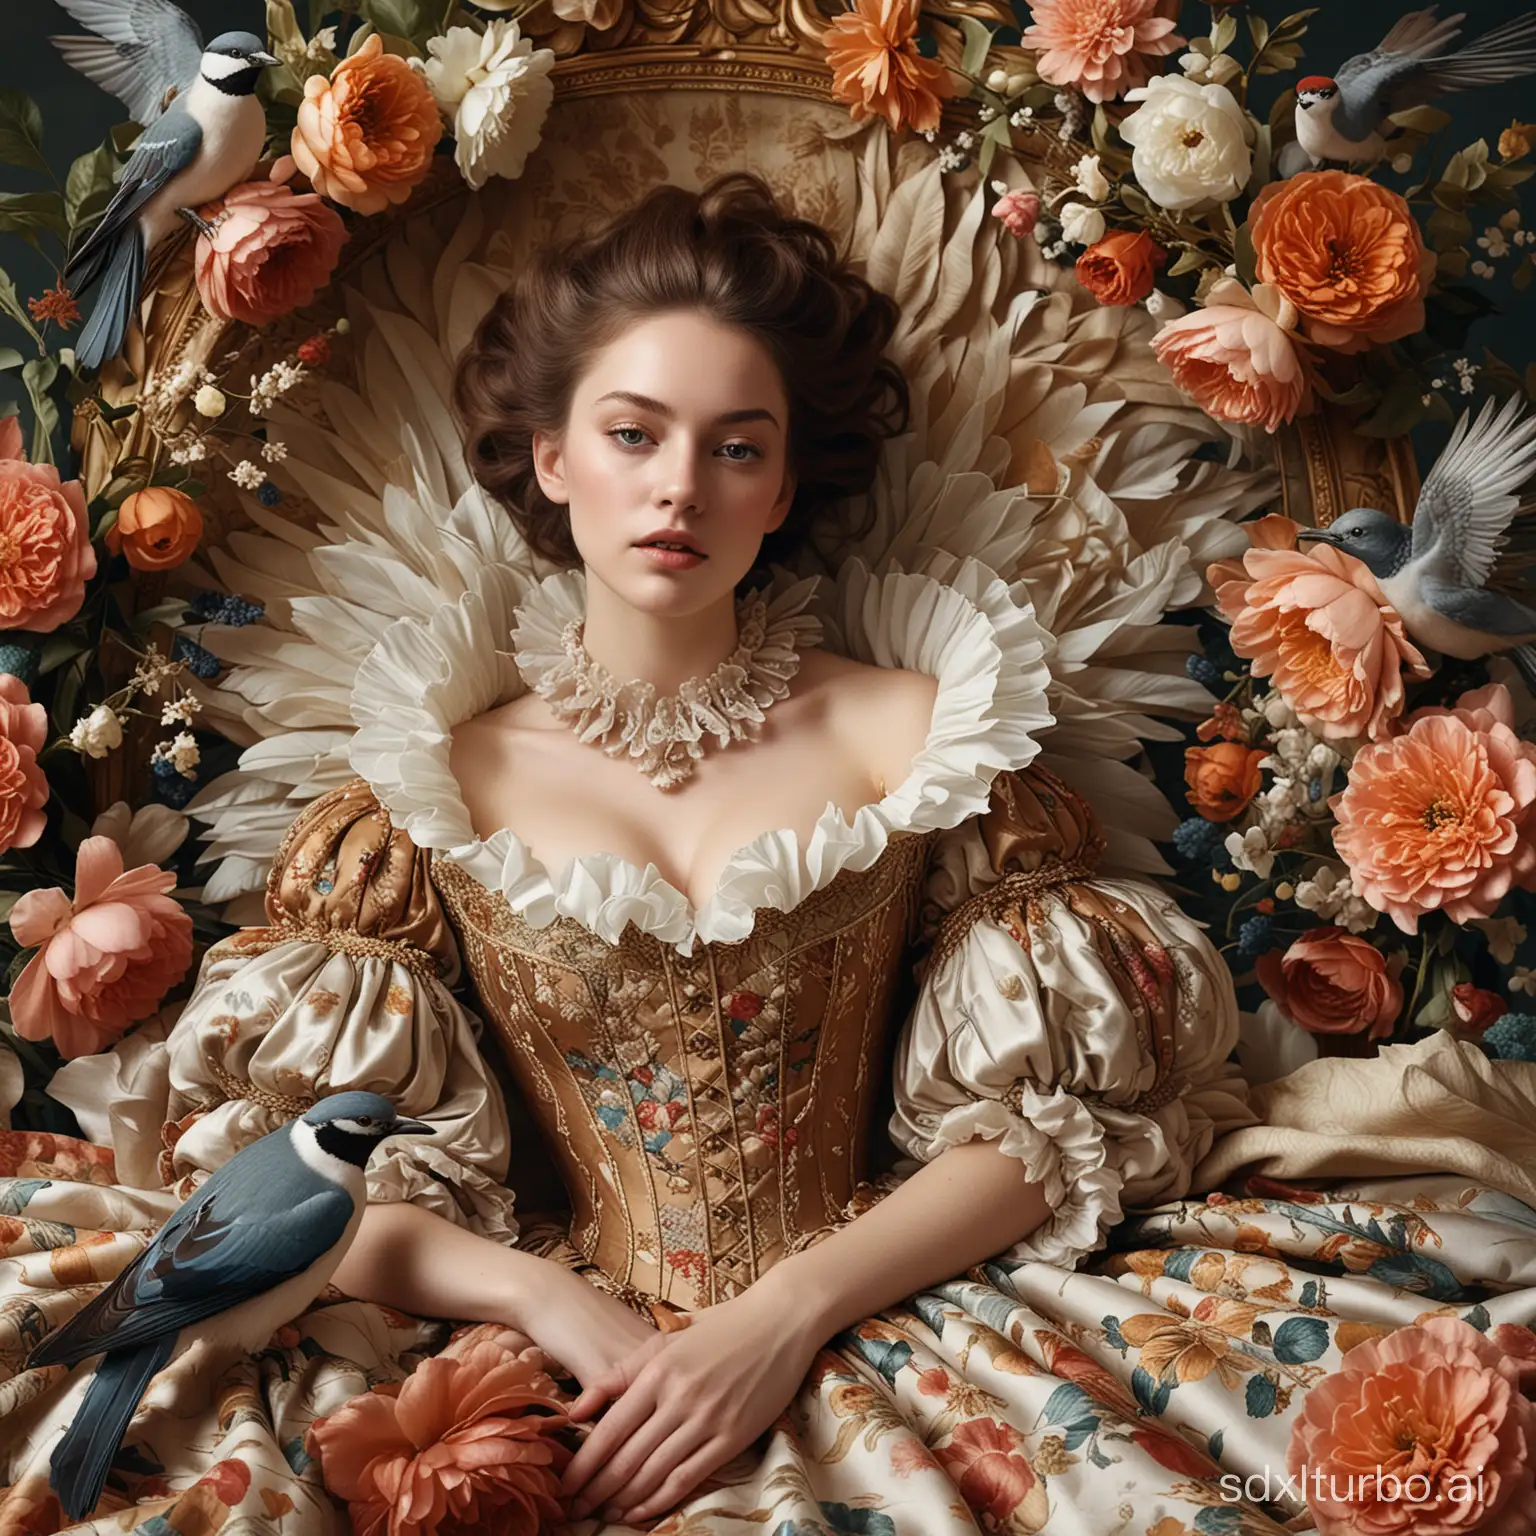 Surreal-Renaissance-Style-Portrait-with-Oversized-Flowers-and-Birds